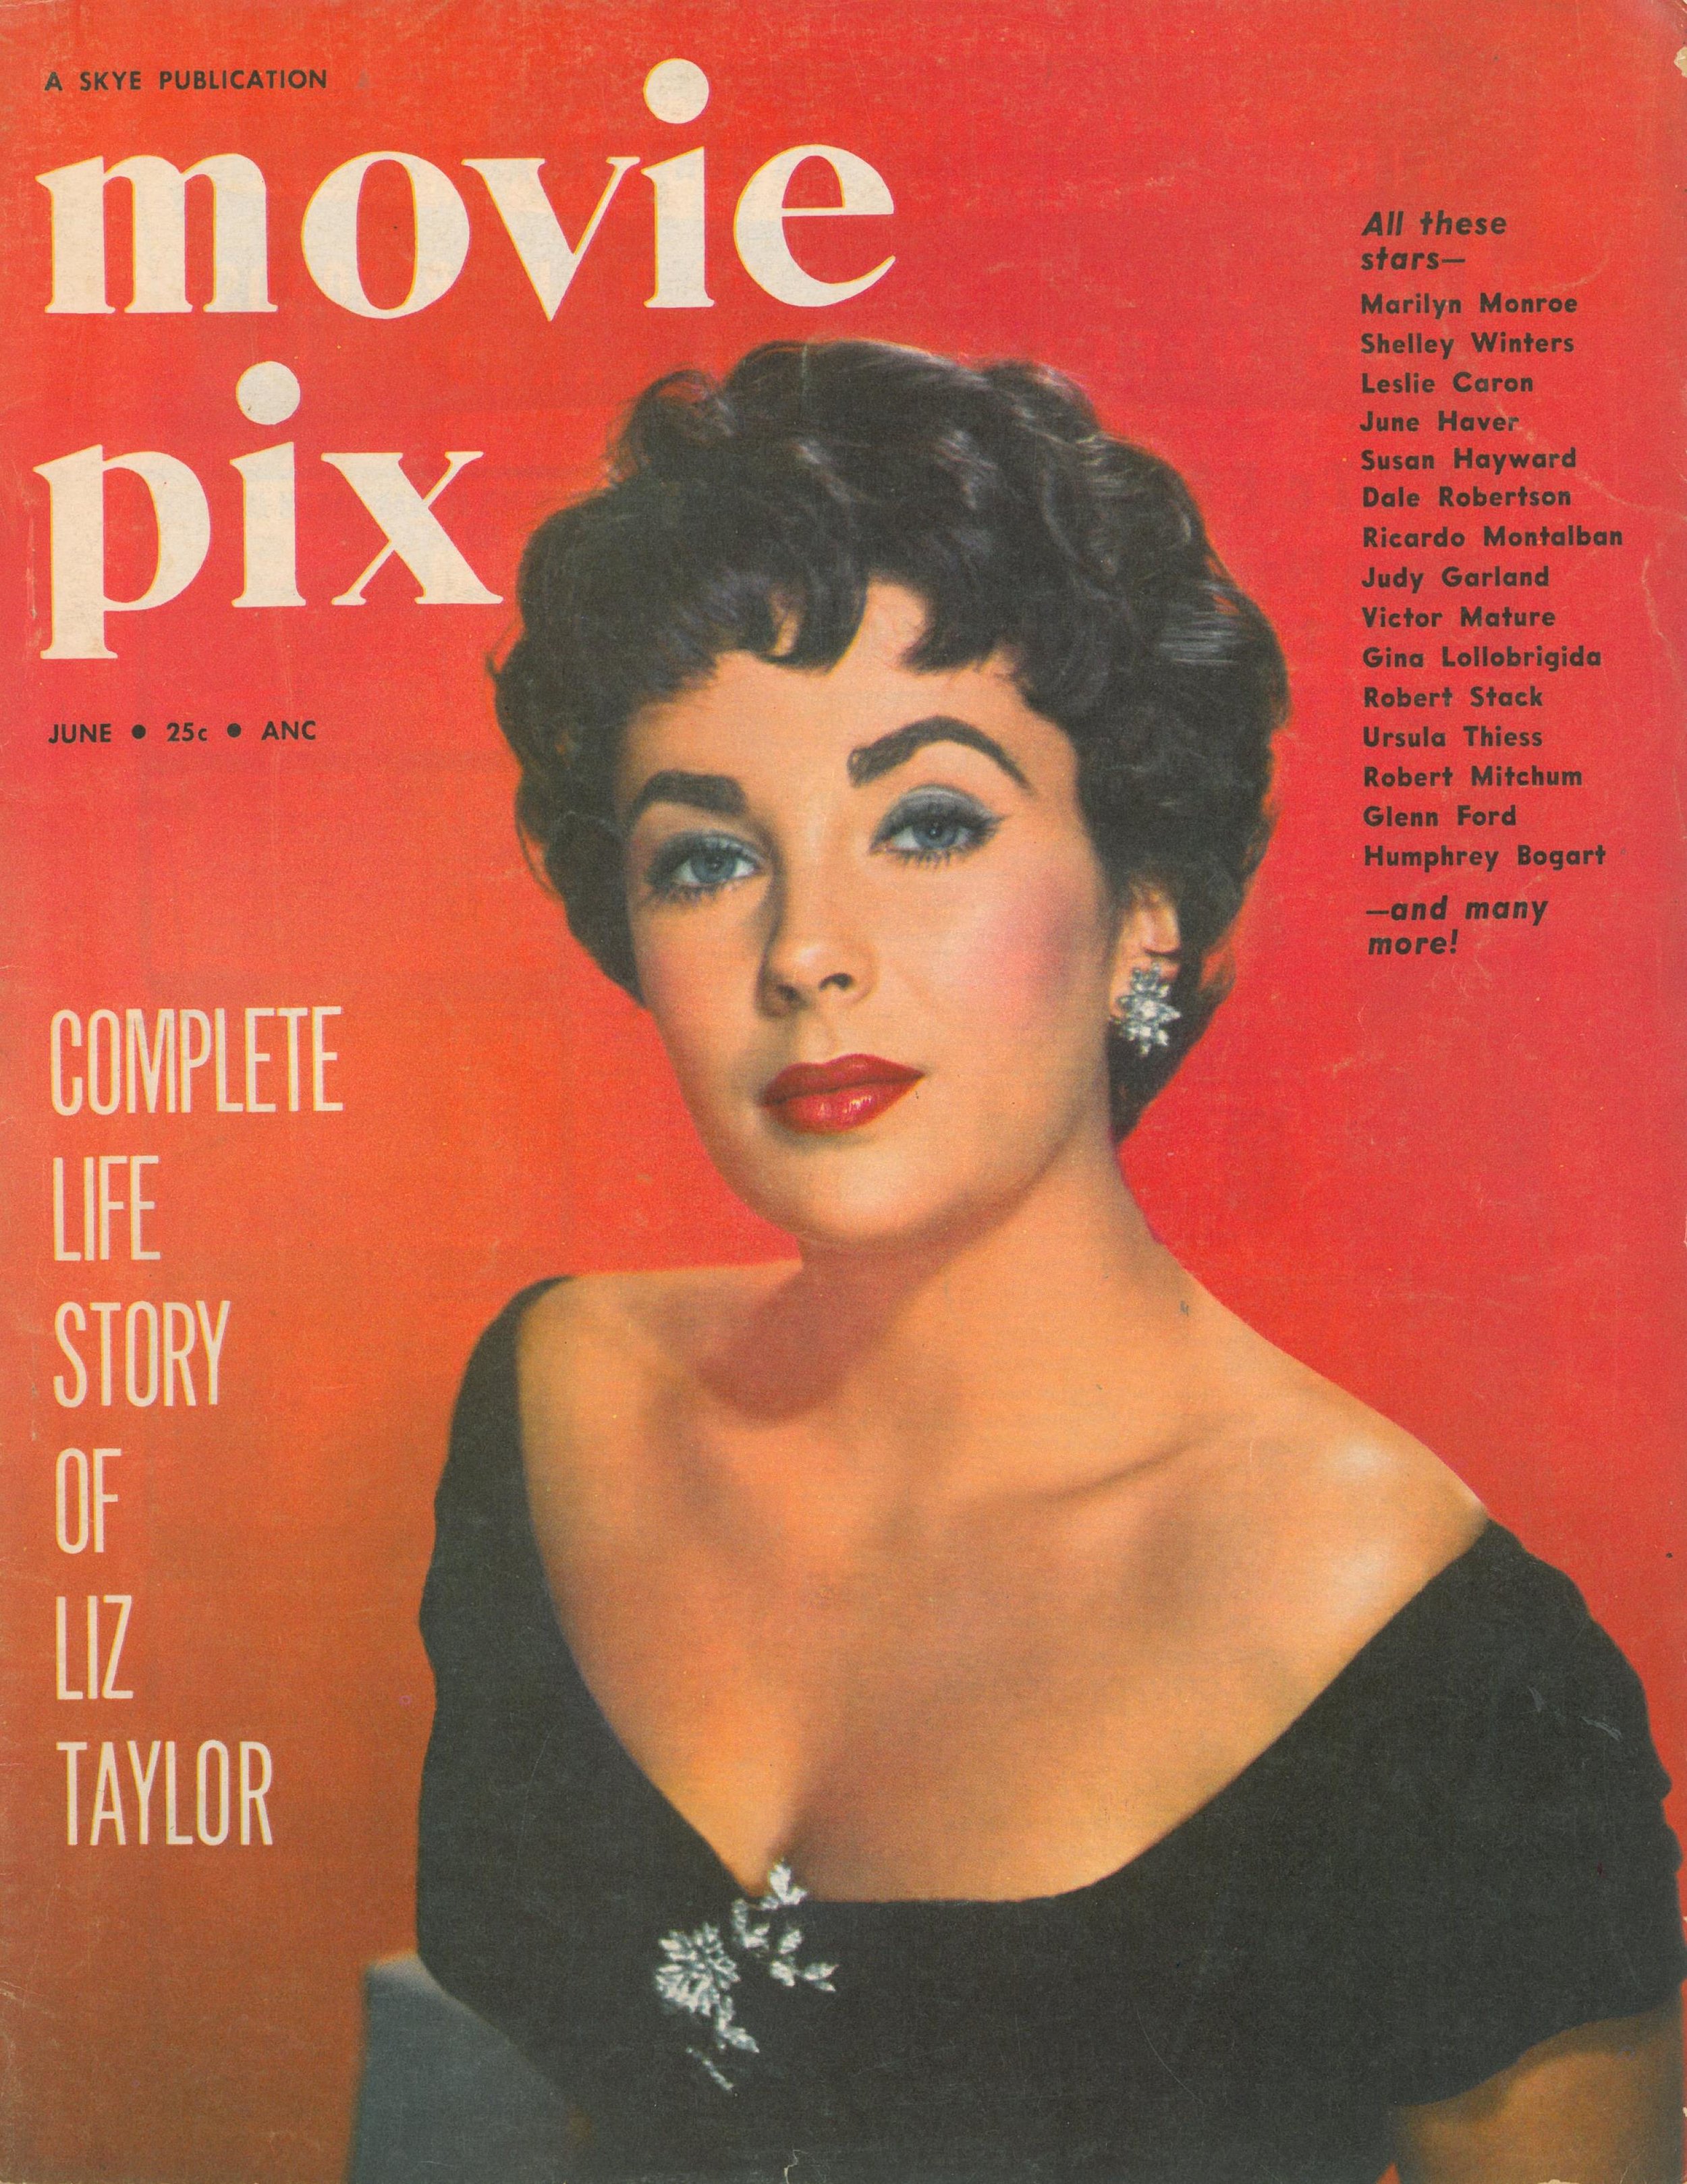   Movie Pix , June 1954, on newsstands in early May 1954. Photo of Bob made when on location in Hawaii, Summer 1953. Columbia Pictures photographer. 